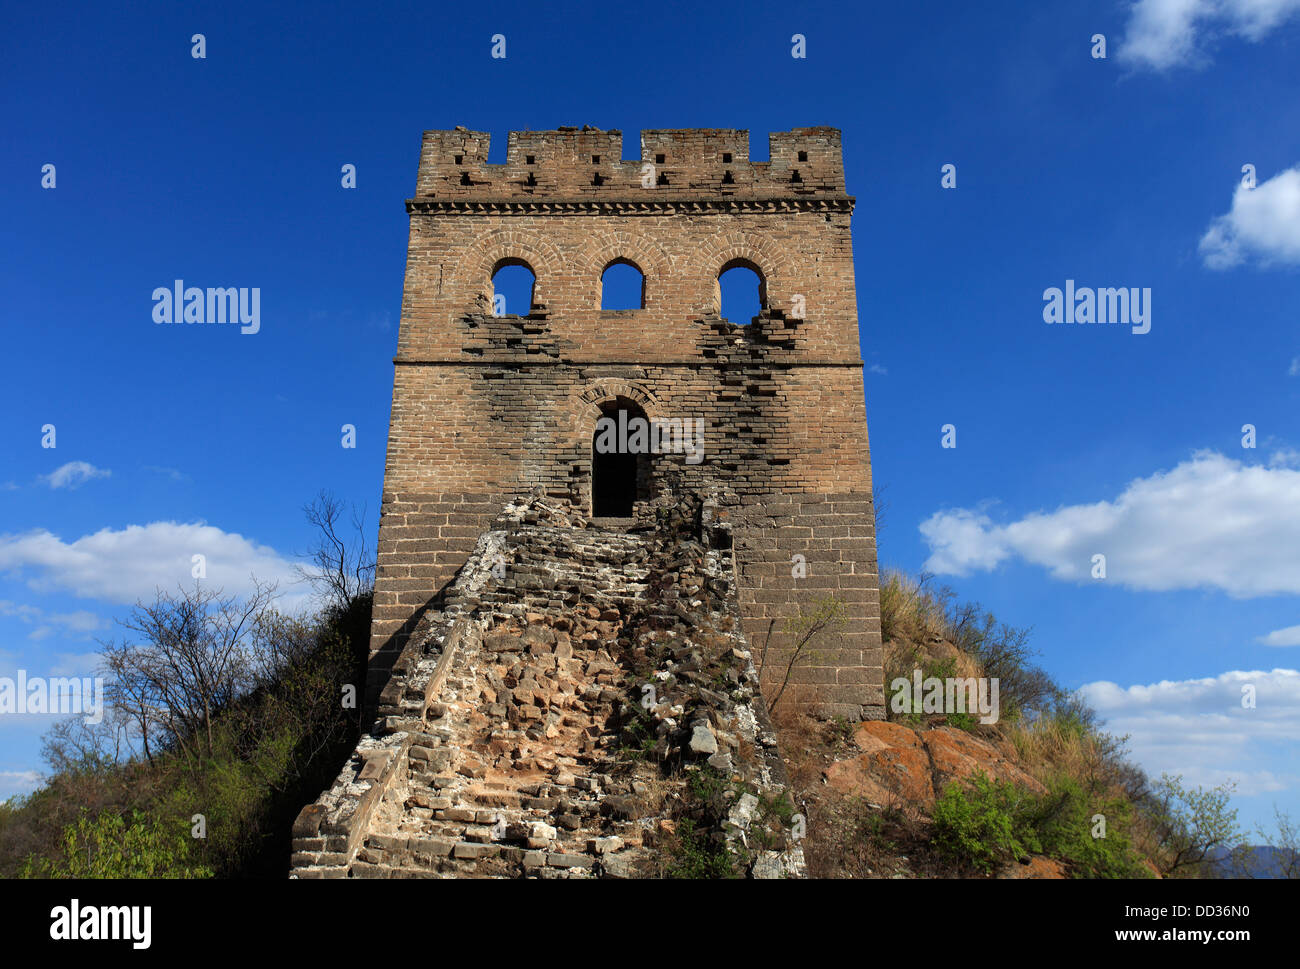 Watch towers on the Great Wall of China near Jinshanling village, Beijing Provence, China, Asia. Stock Photo